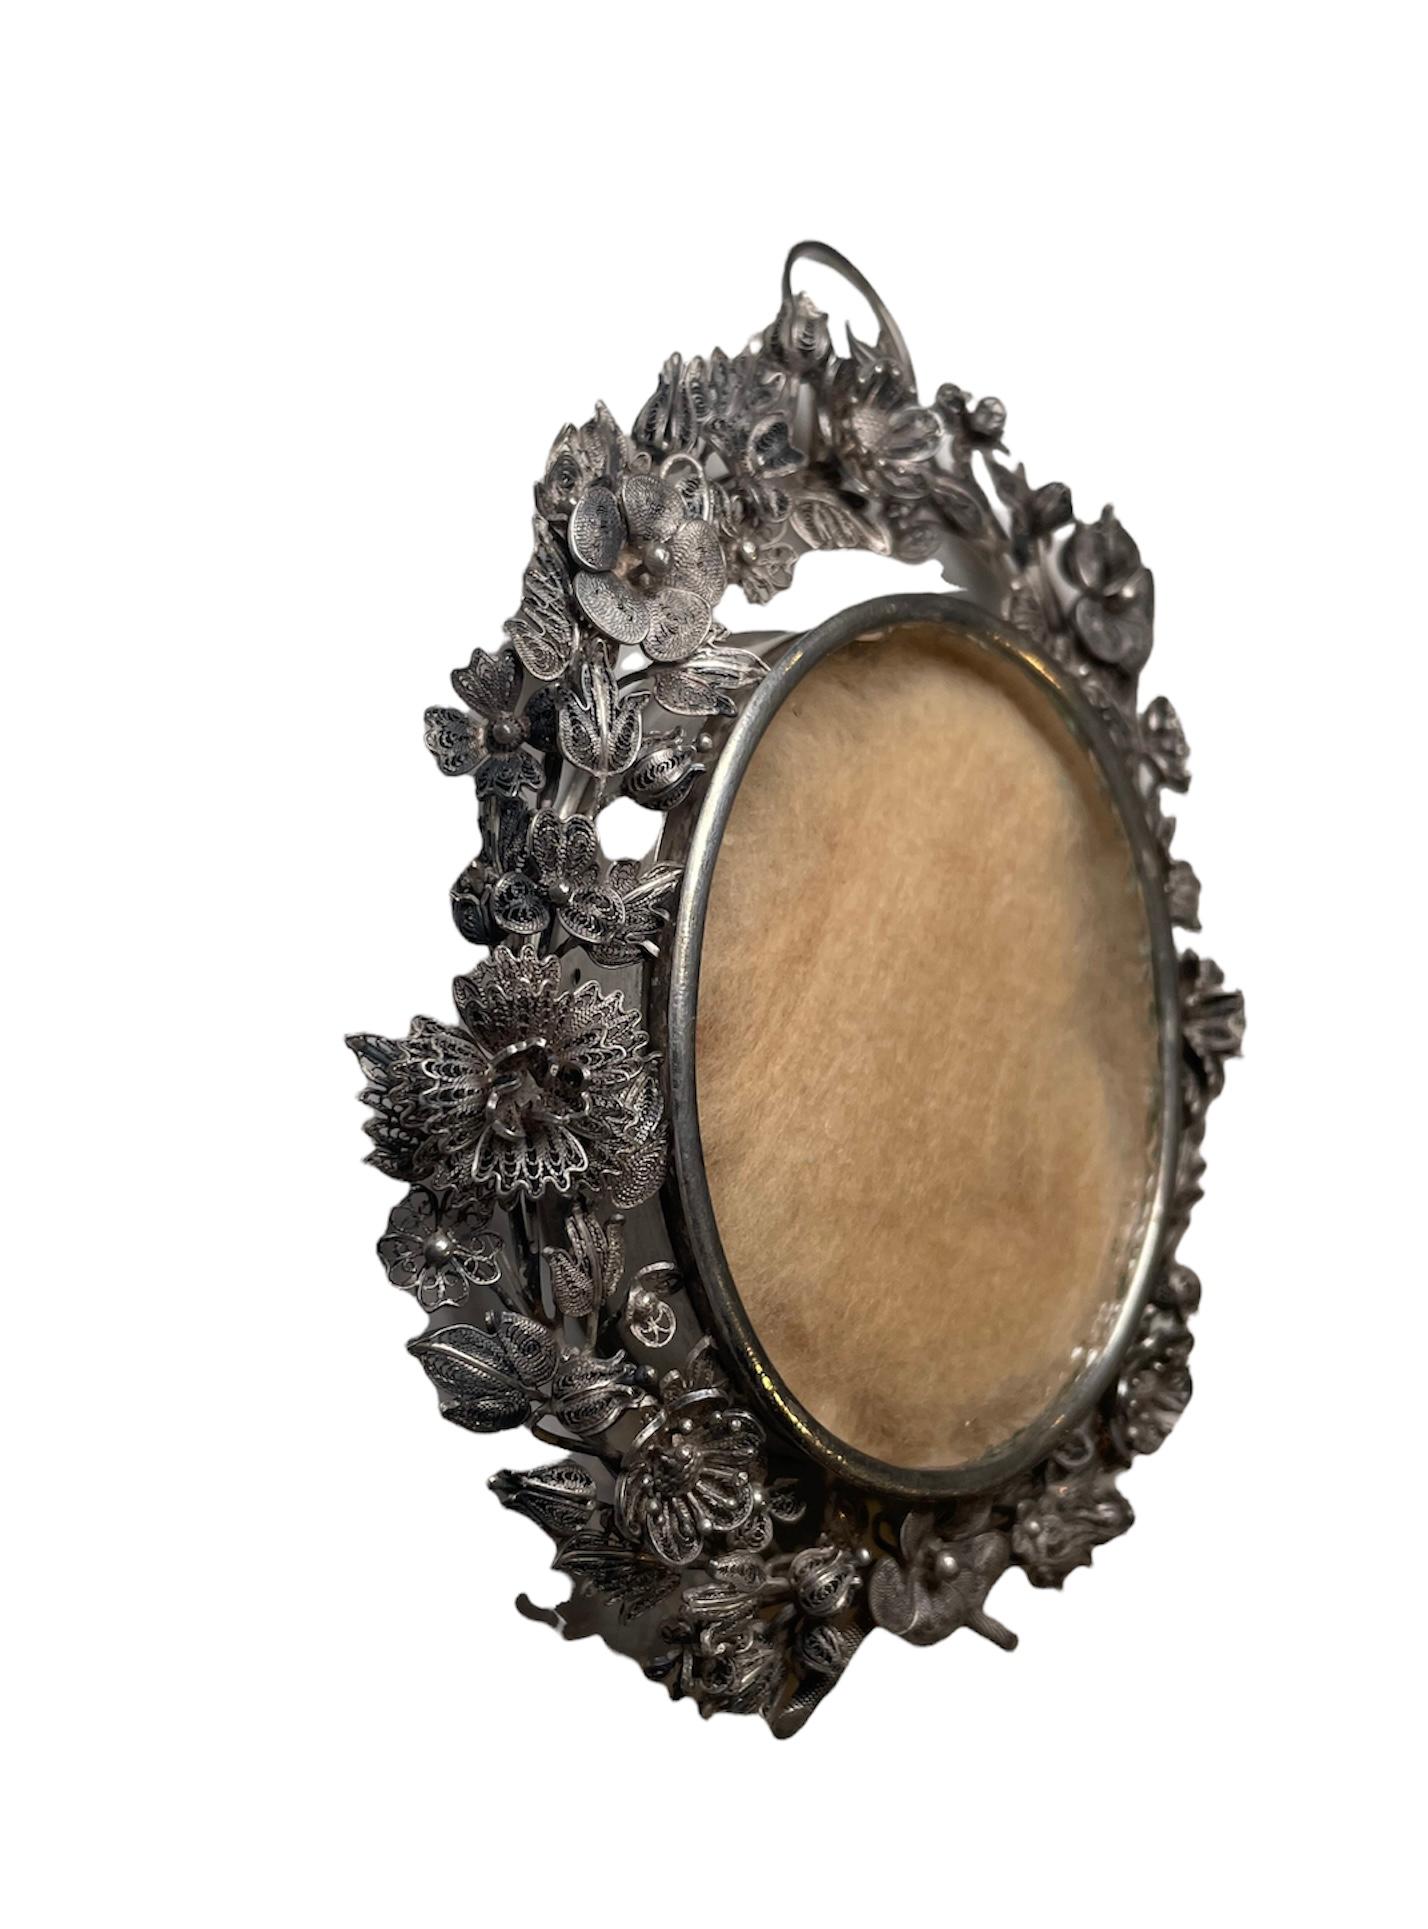 This a large oval silver locket/reliquary pendant. The oval shaped silver case is decorated around its border by different kind of large and small filigree flowers with foliage. There is an oval shaped glass that covers the front and back of the